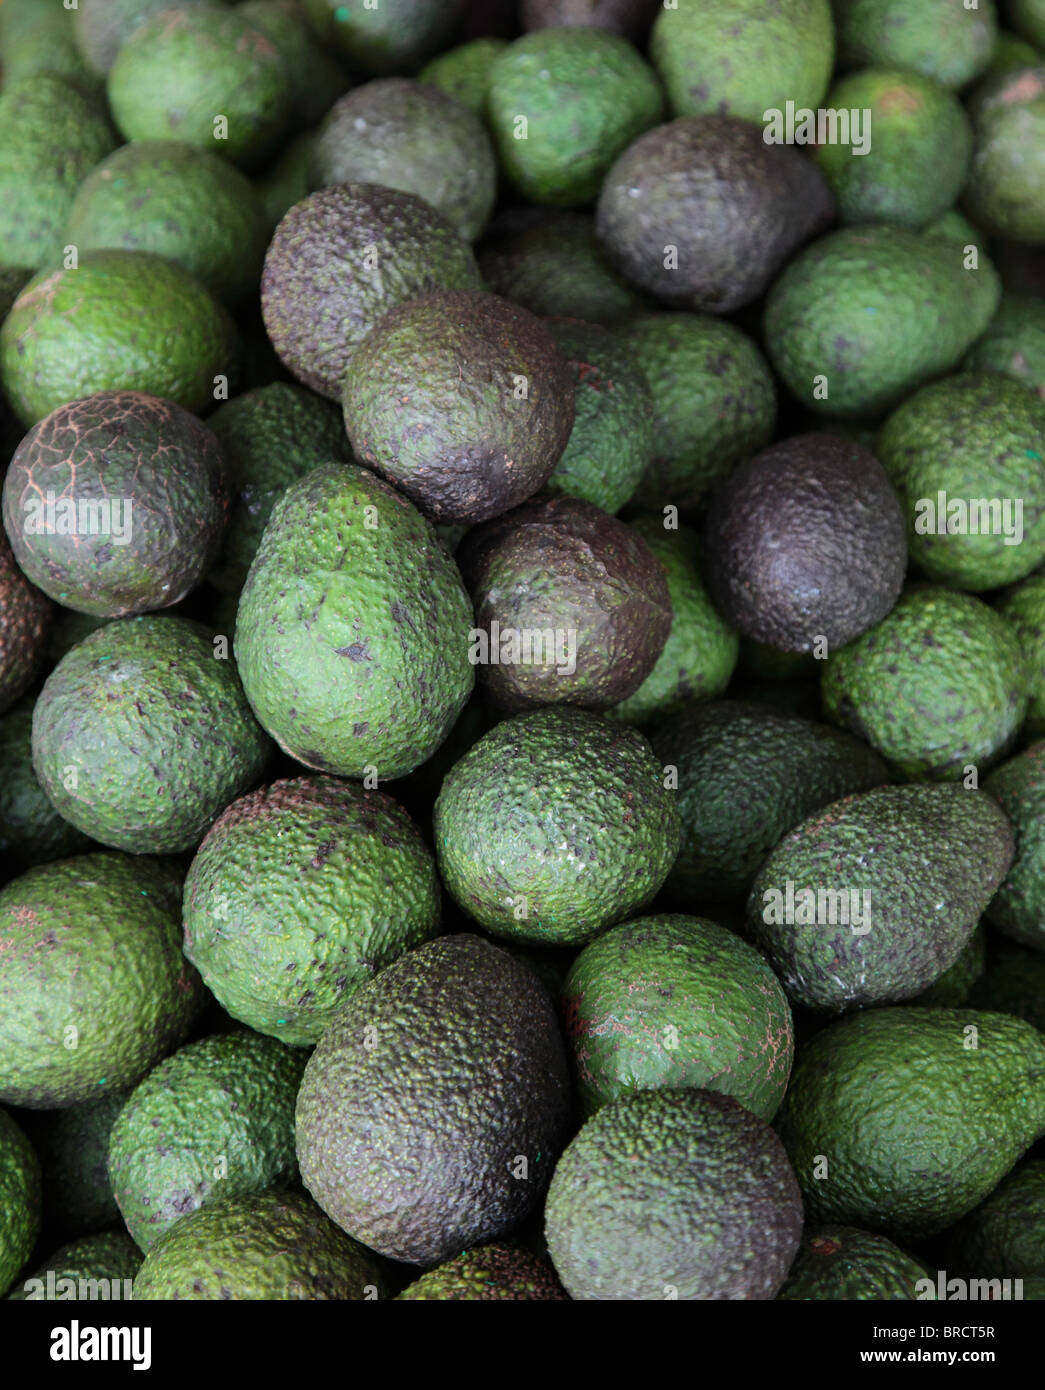 Market stall offering avocados. Stock Photo